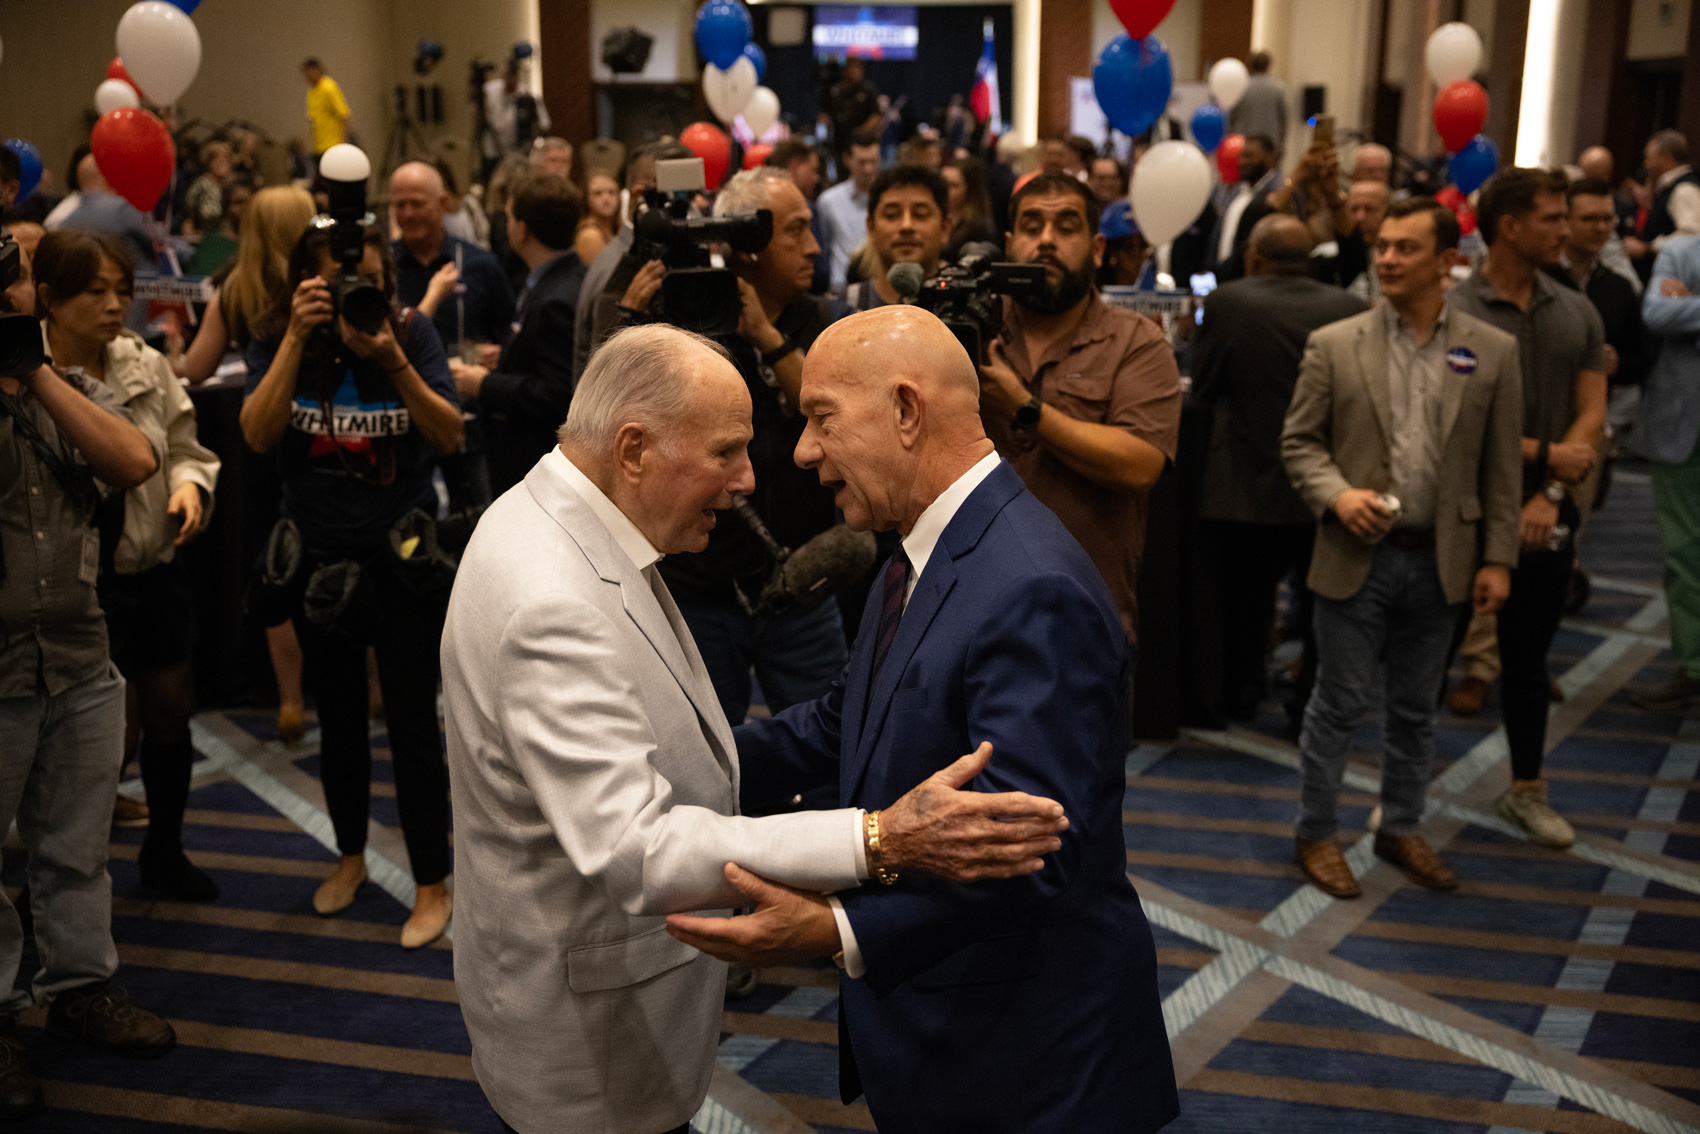 Houston mayoral candidate State Senator John Whitmire, at right, speaks with Don Sanders, at left, during a watch party on Election Day